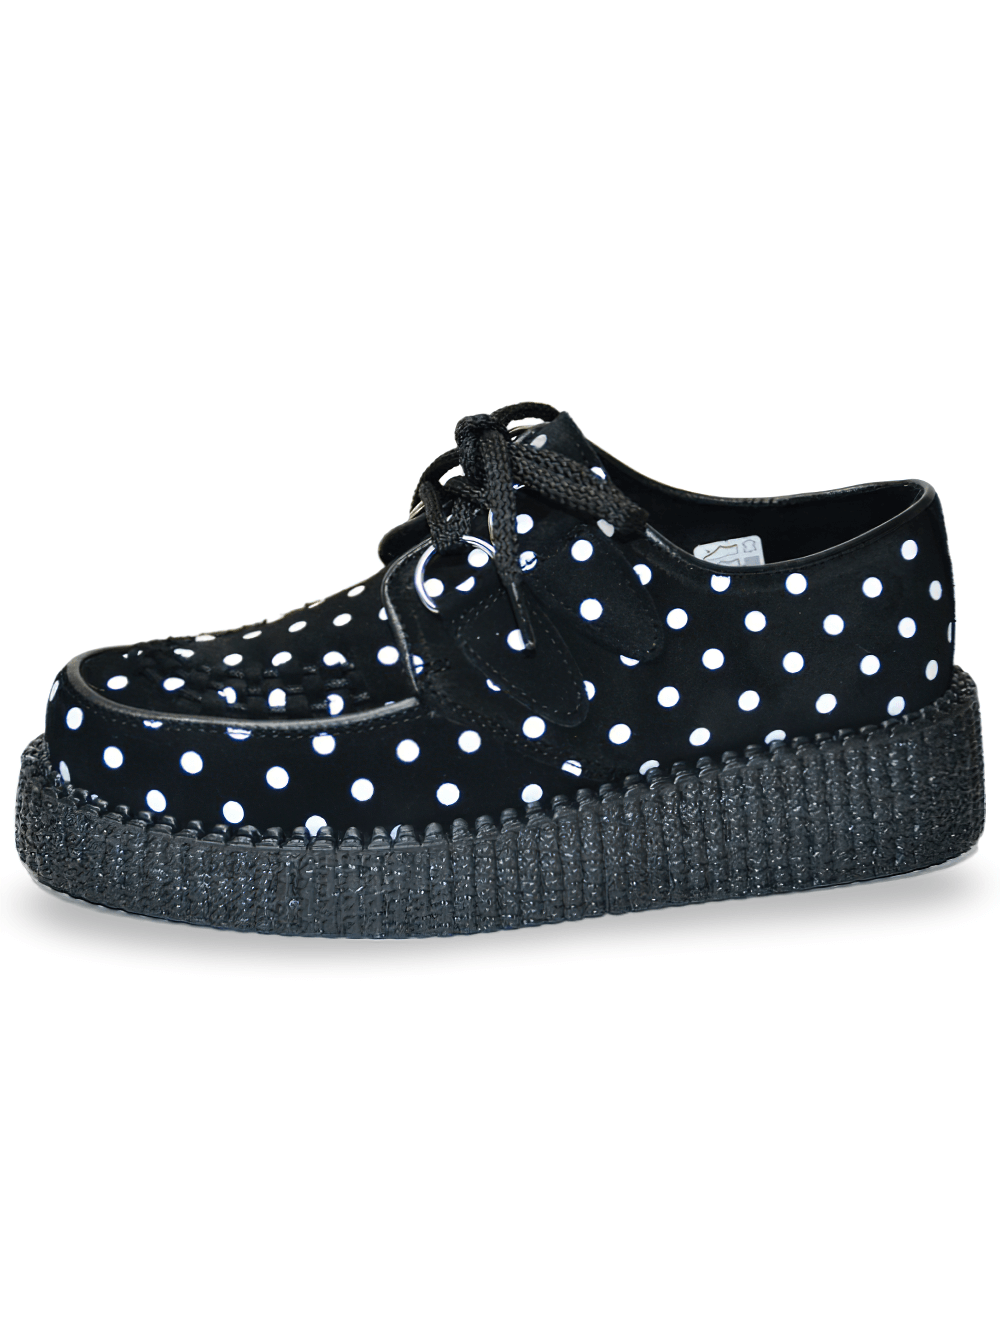 Stylish Polka Dot Black Suede Creepers with Lace-Up